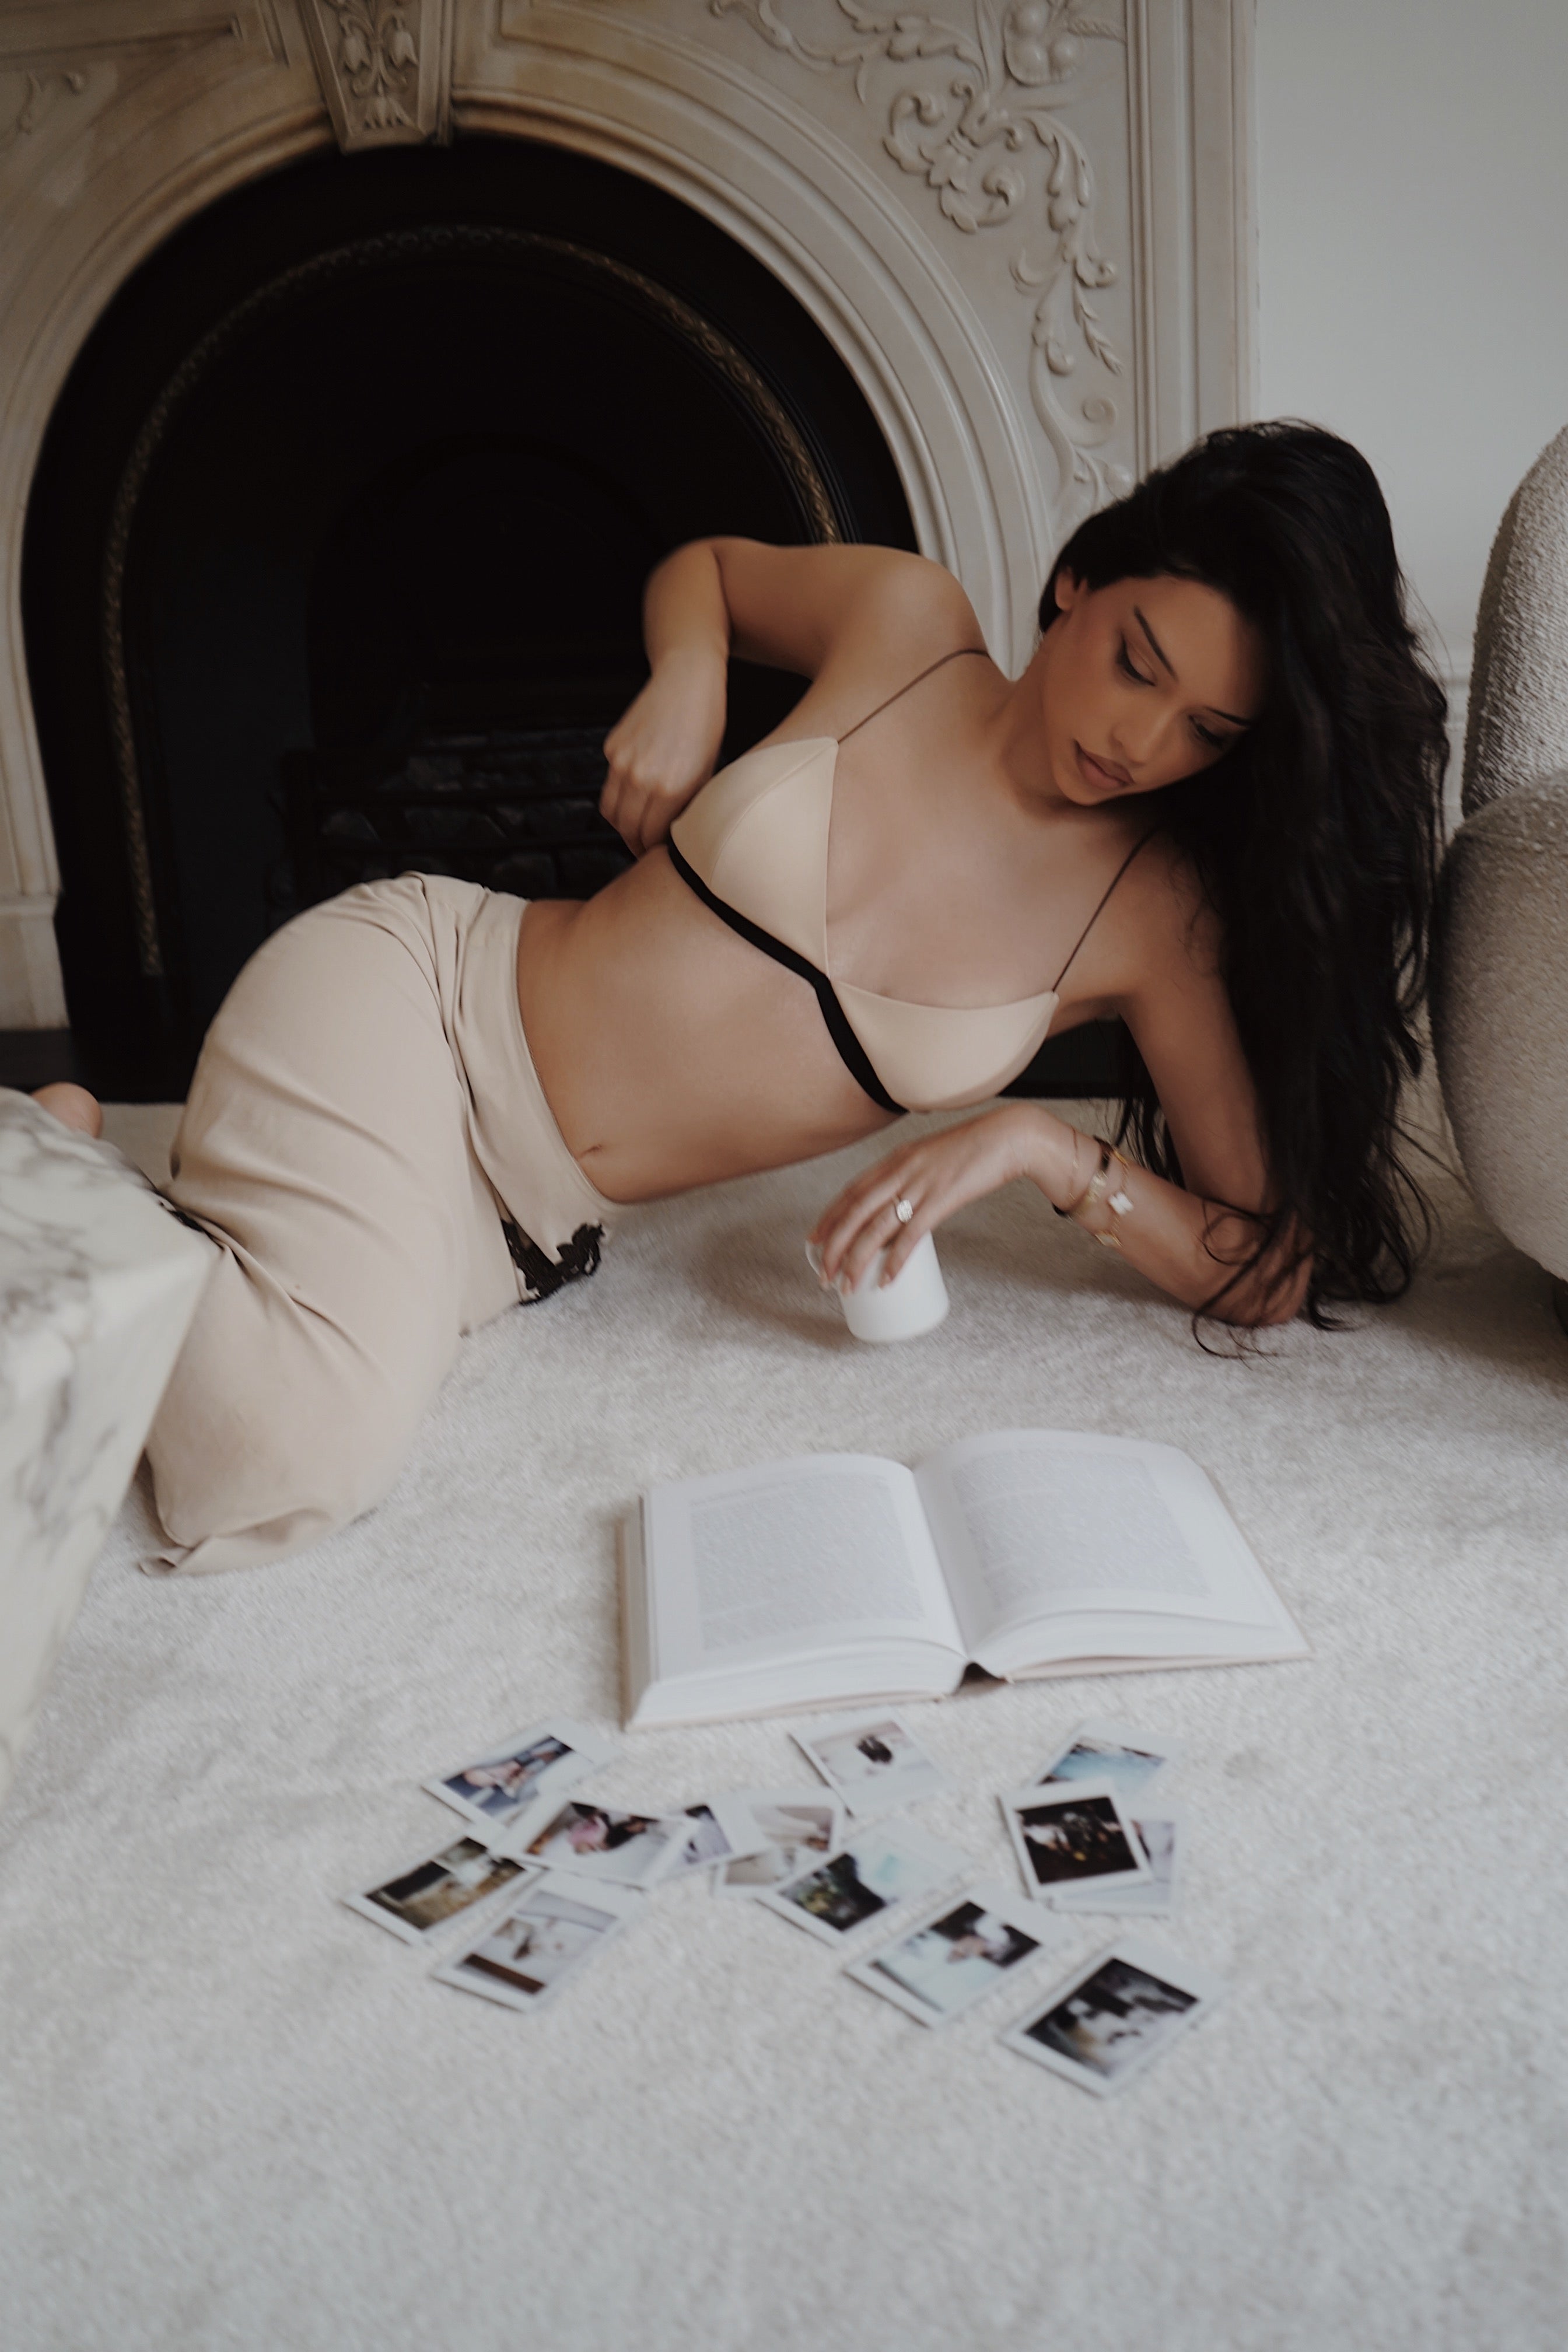 Layers: Get Intimate With Janice Joostema